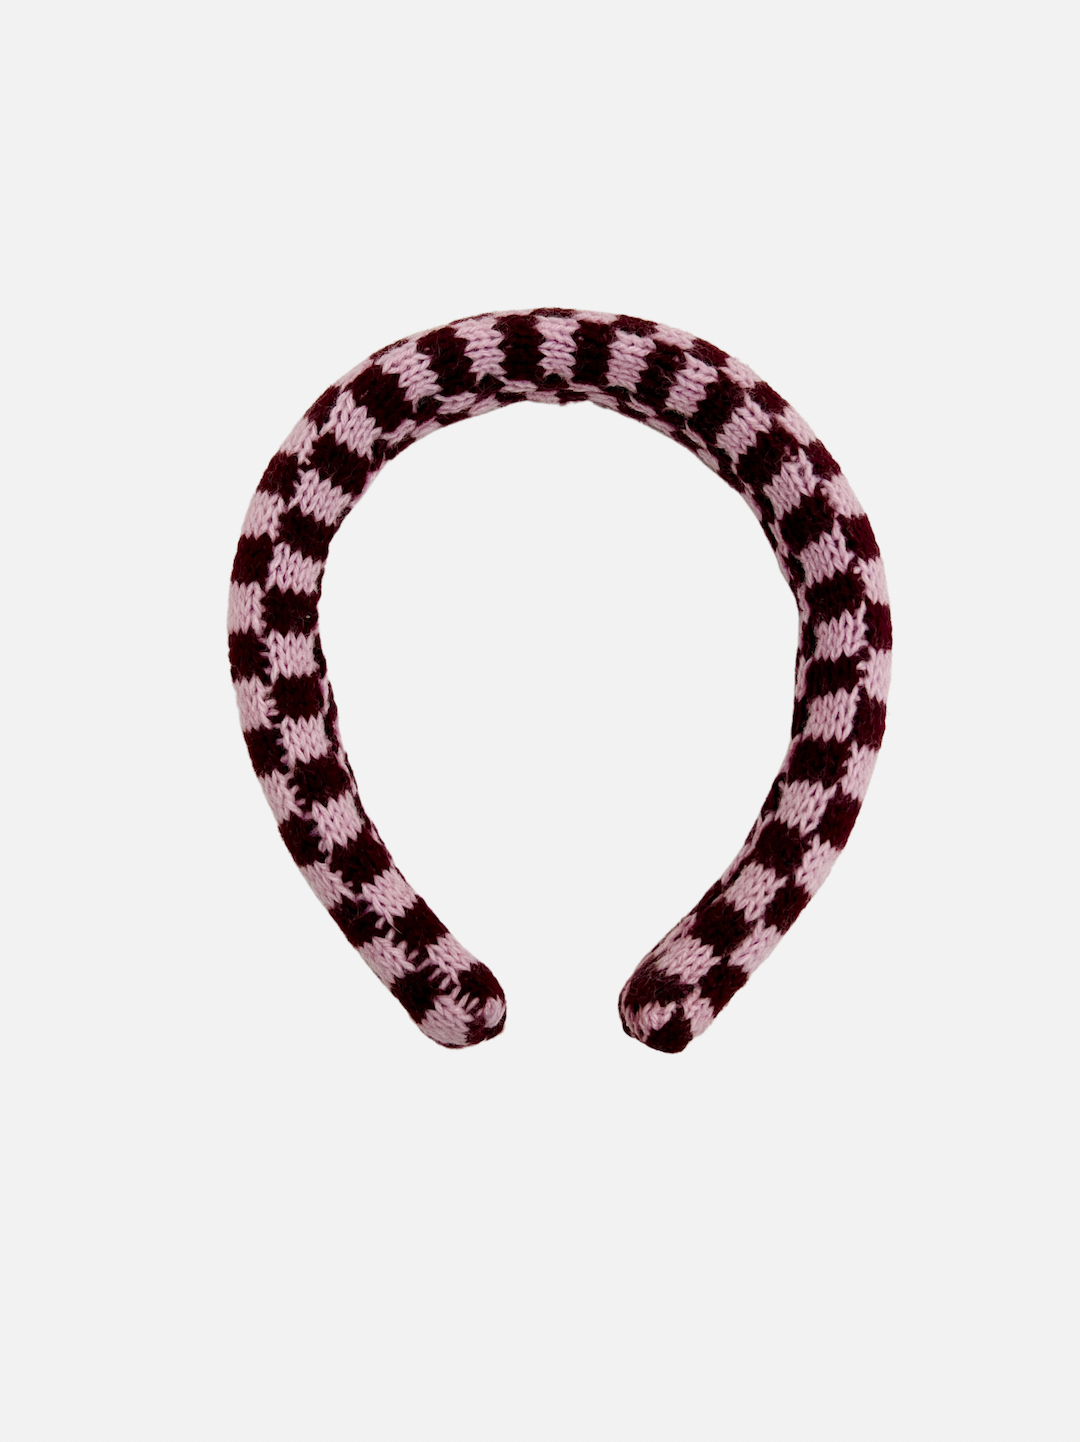 A kids' knitted headband in a pink and dark red check